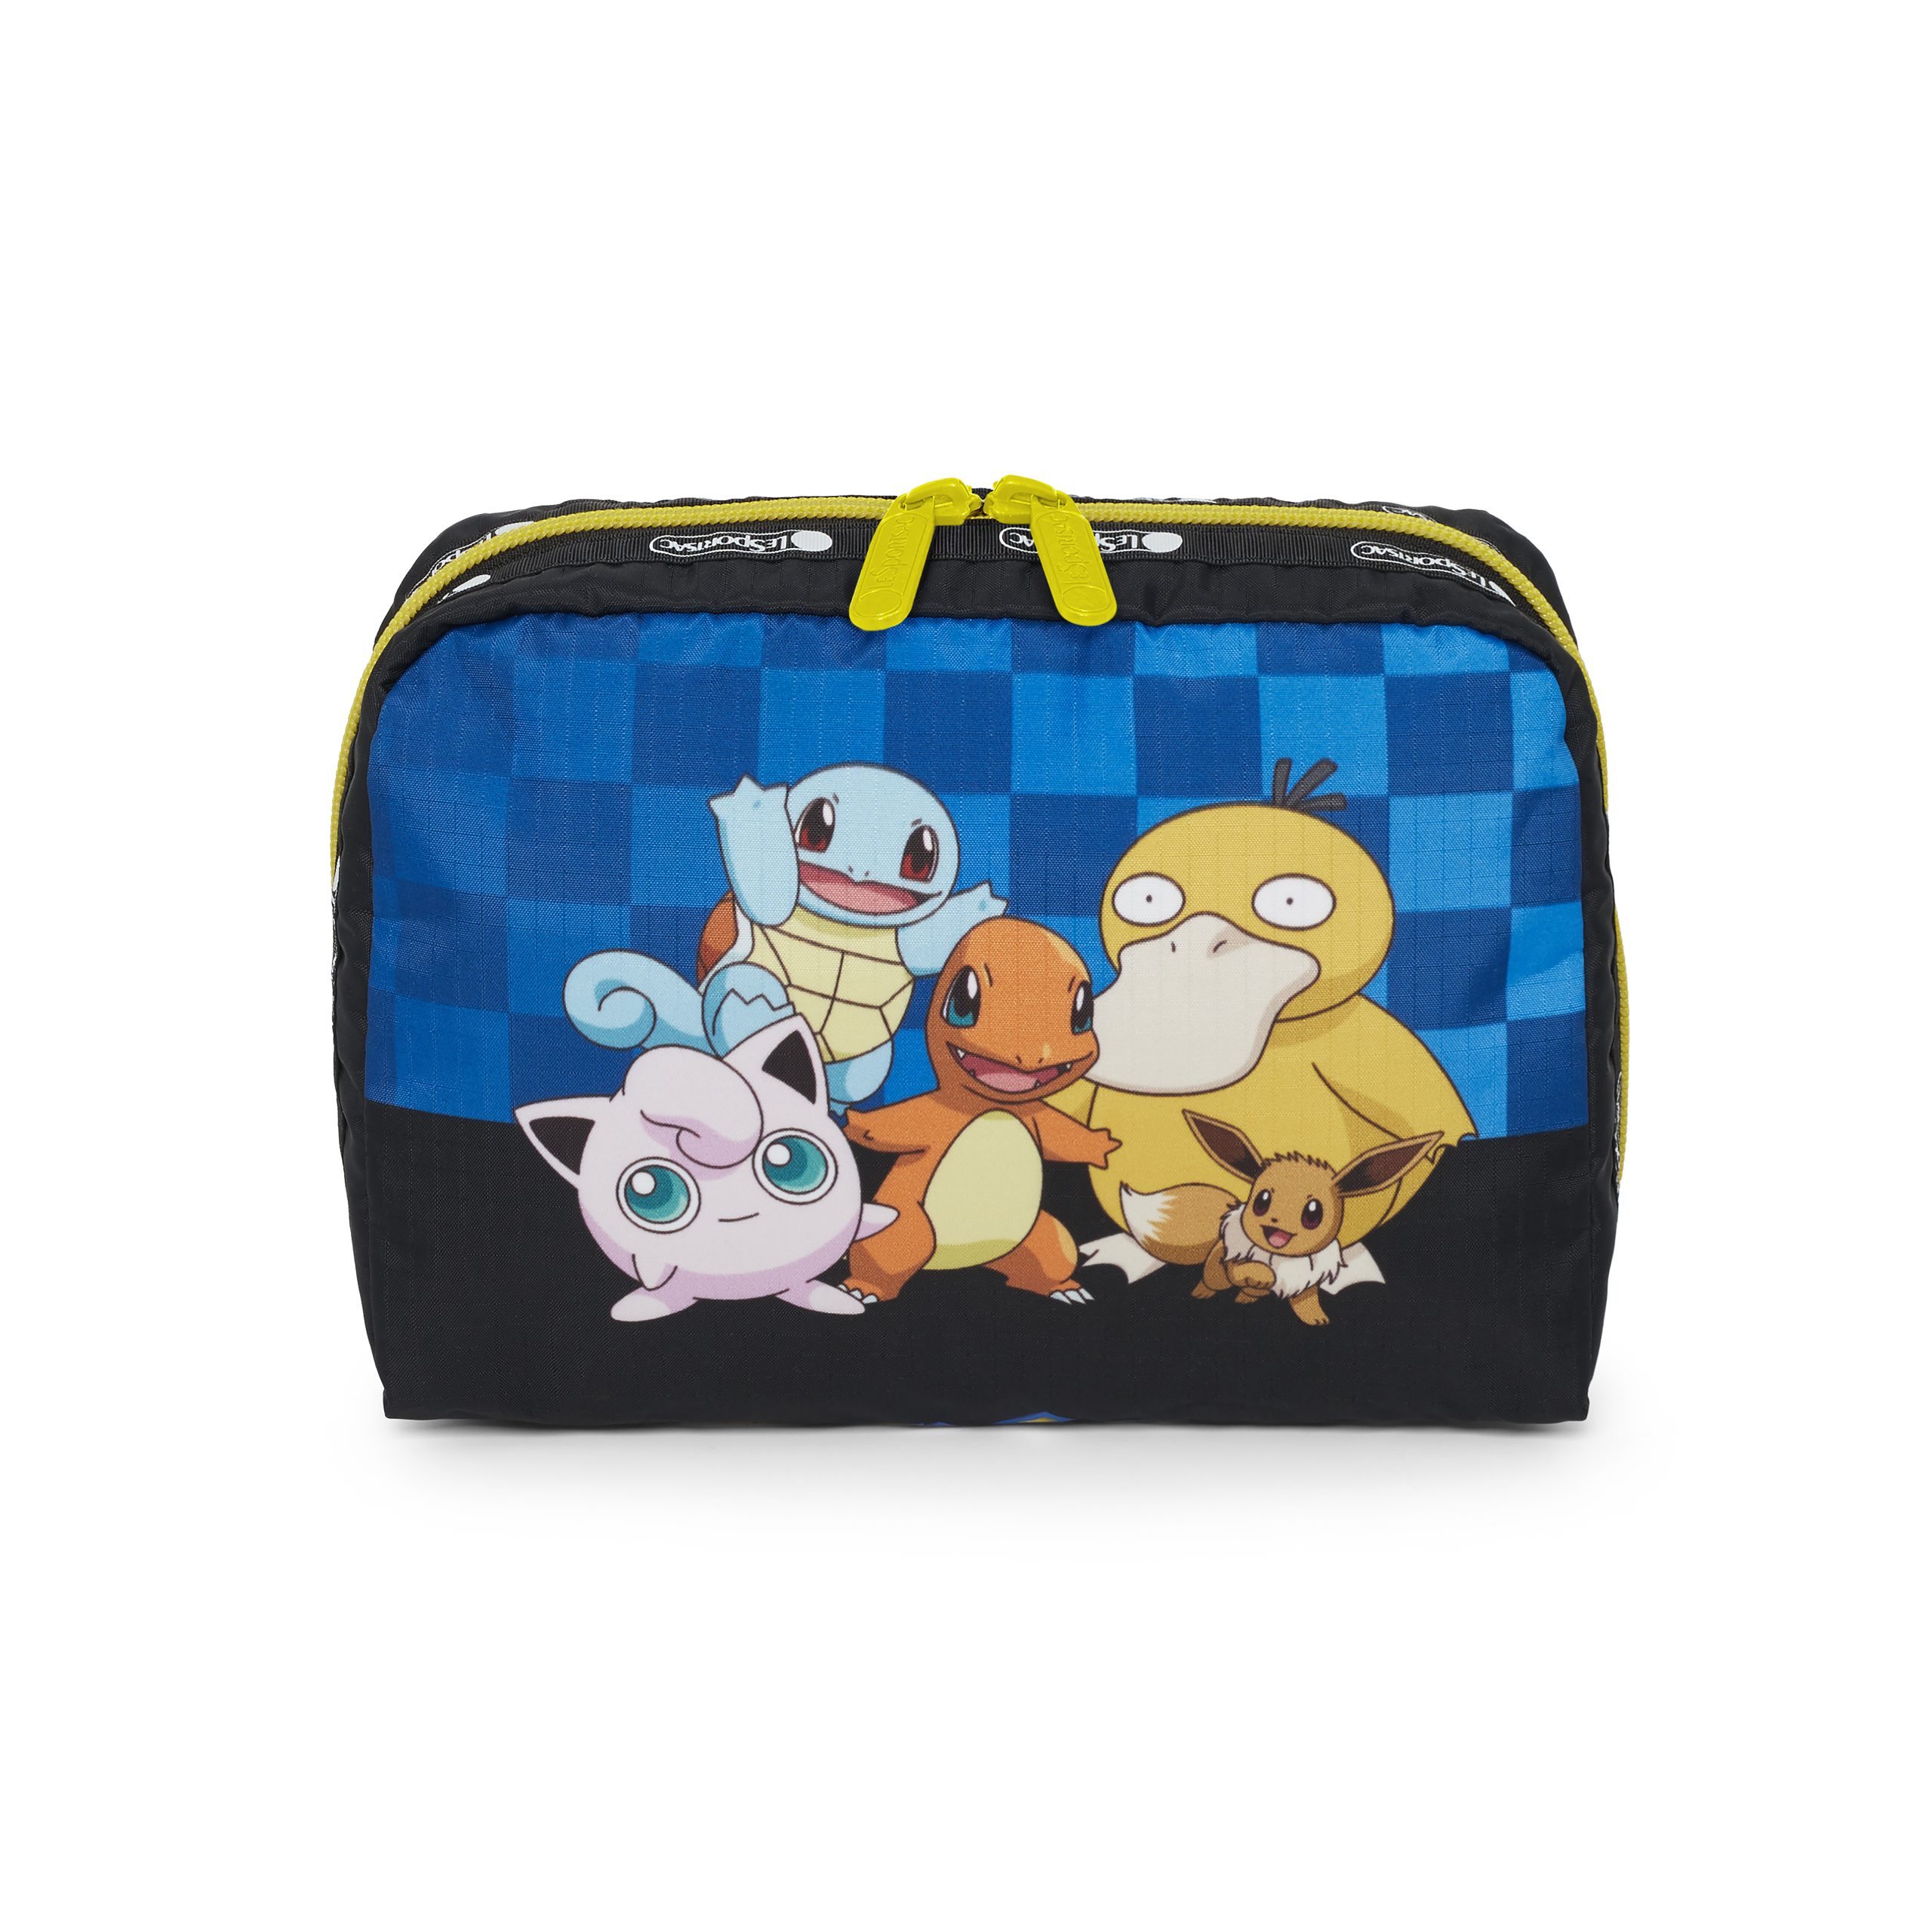 Pokemon x LeSportsac bags available in S'pore from July 4, 2020 ...